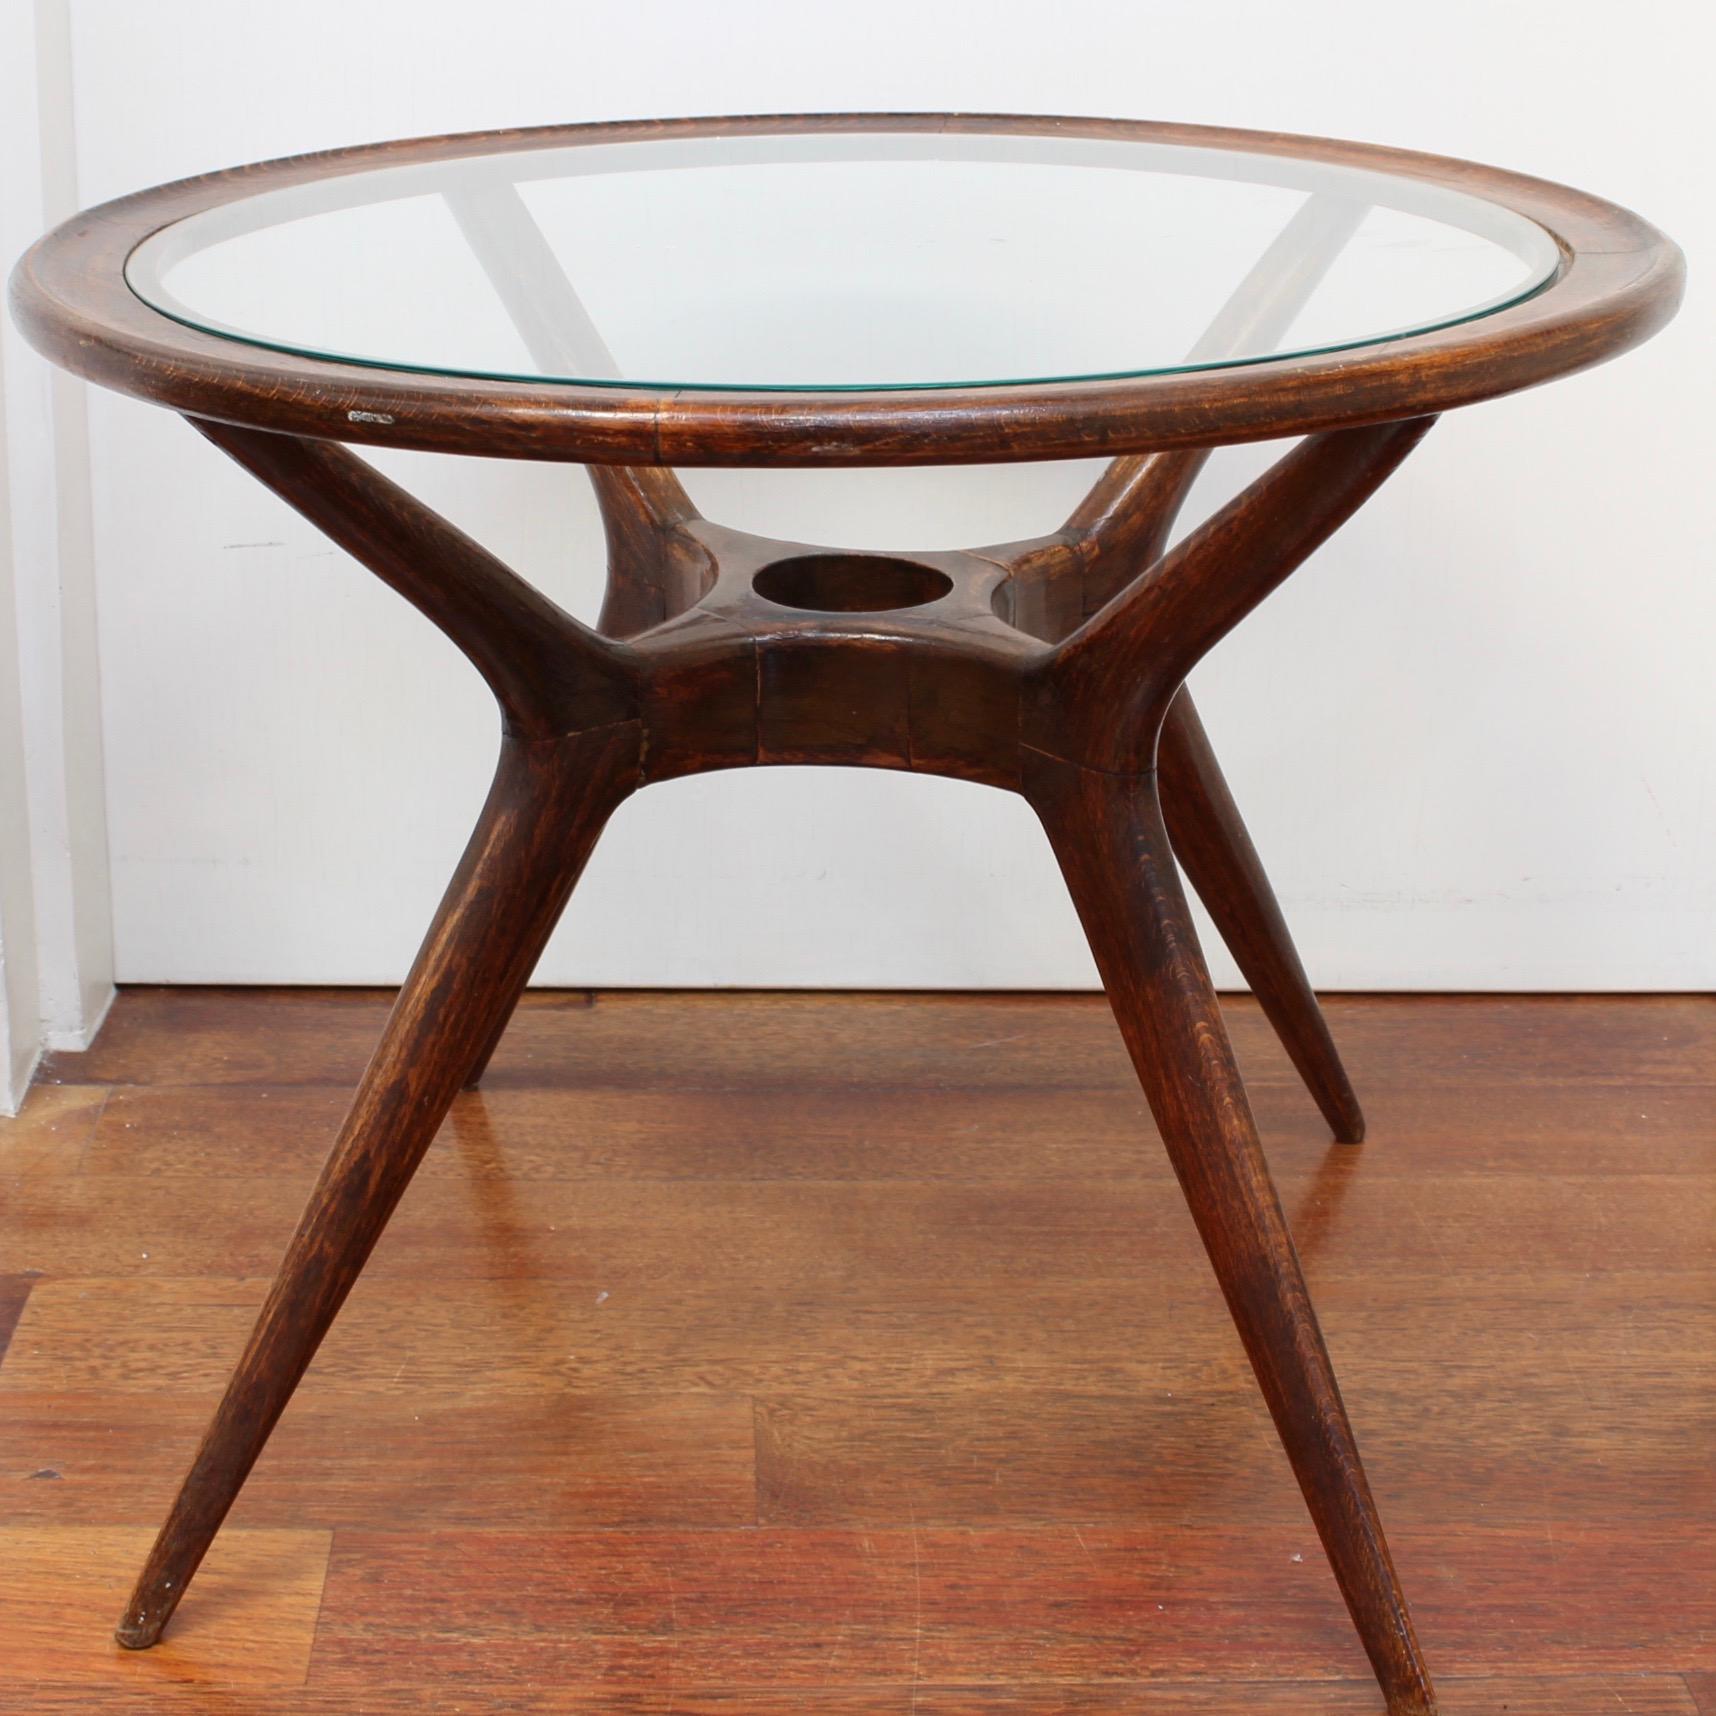 Mid-Century Modern Italian side table with glass top by Ico Parisi, (circa 1950s). In Parisi's iconic style with boomerang-shaped legs supporting a wooden frame and glass top (the original glass has been replaced with new glass). The wood has